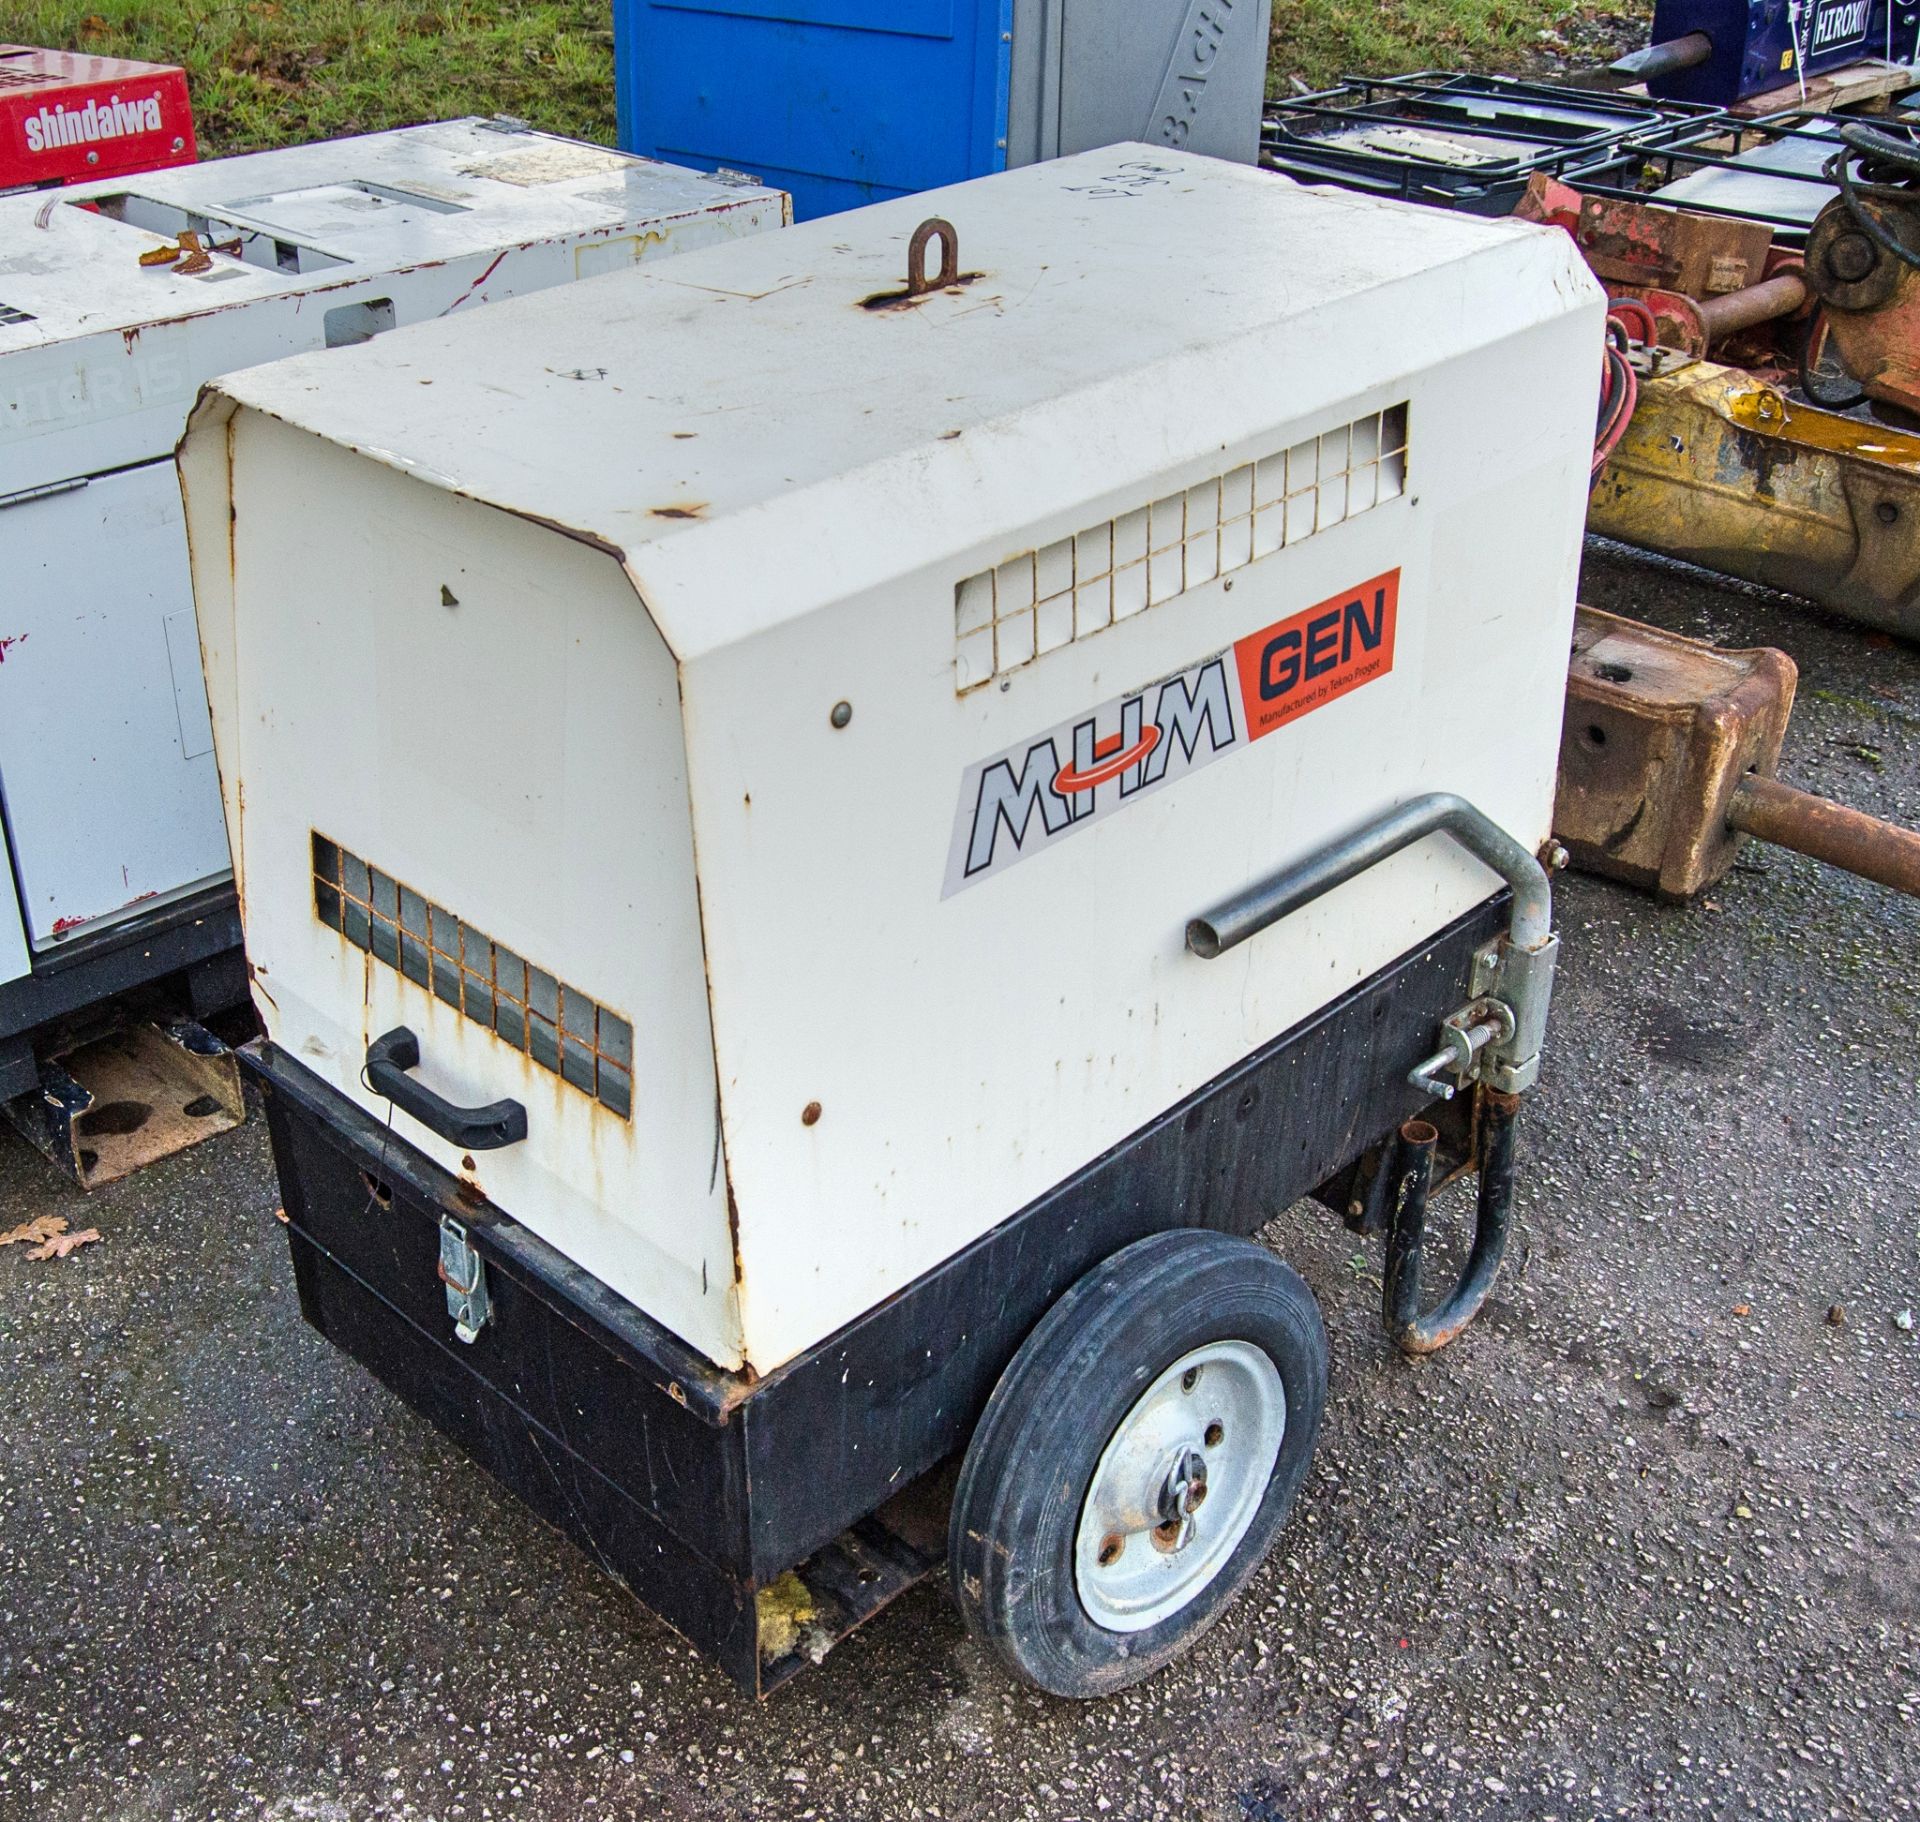 MHM MGTP 6000 ESS-Y 6 kva diesel driven generator S/N: 226190090 Recorded Hours: 1462 A1097758 - Image 2 of 5